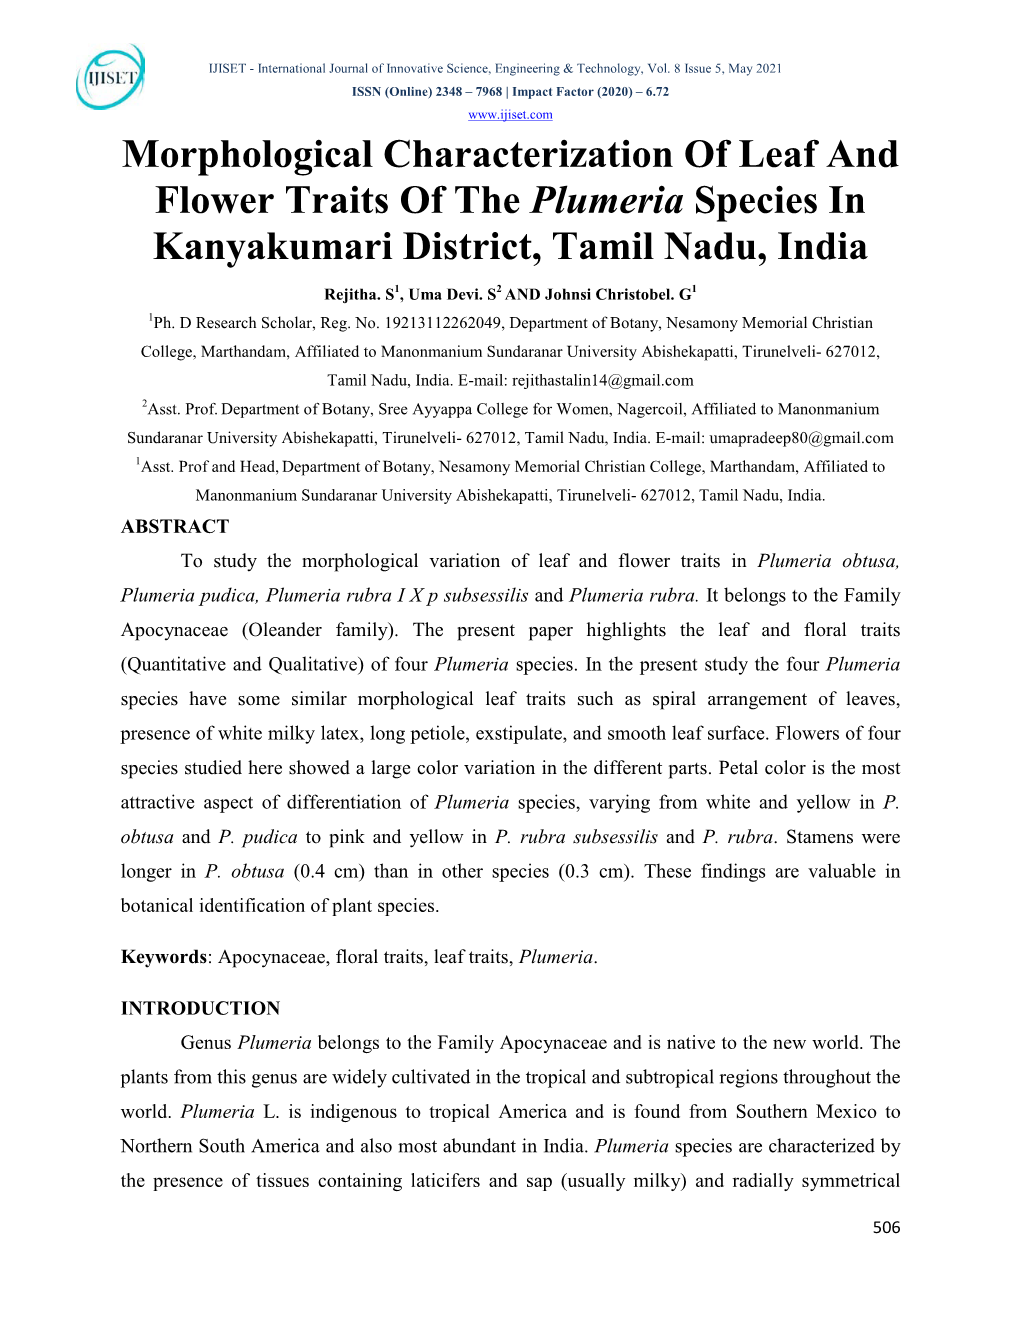 Morphological Characterization of Leaf and Flower Traits of the Plumeria Species in Kanyakumari District, Tamil Nadu, India